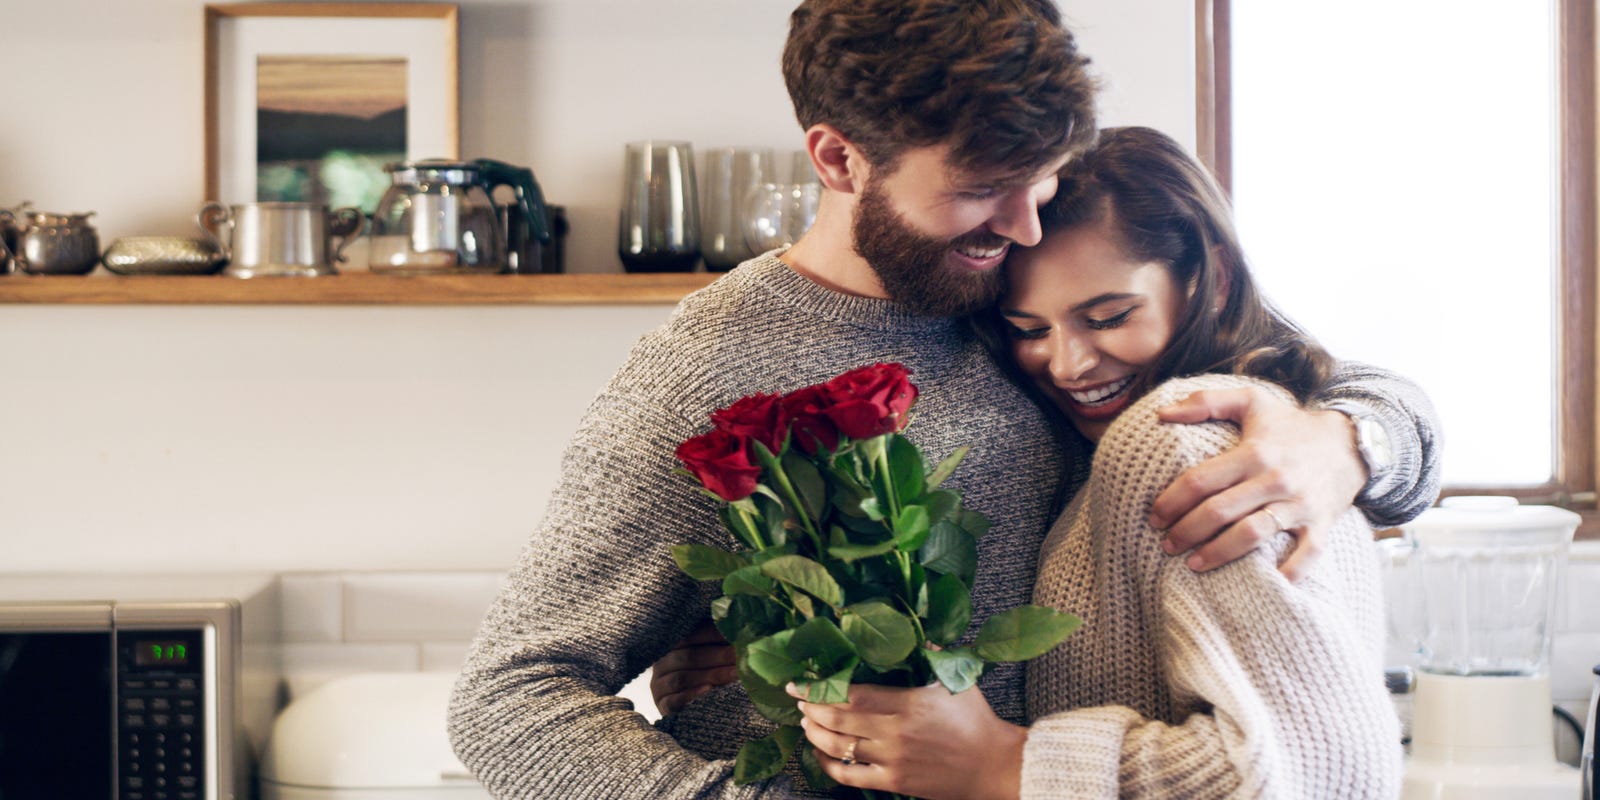 5 Romantic Gifts You Should Get For Your Wife